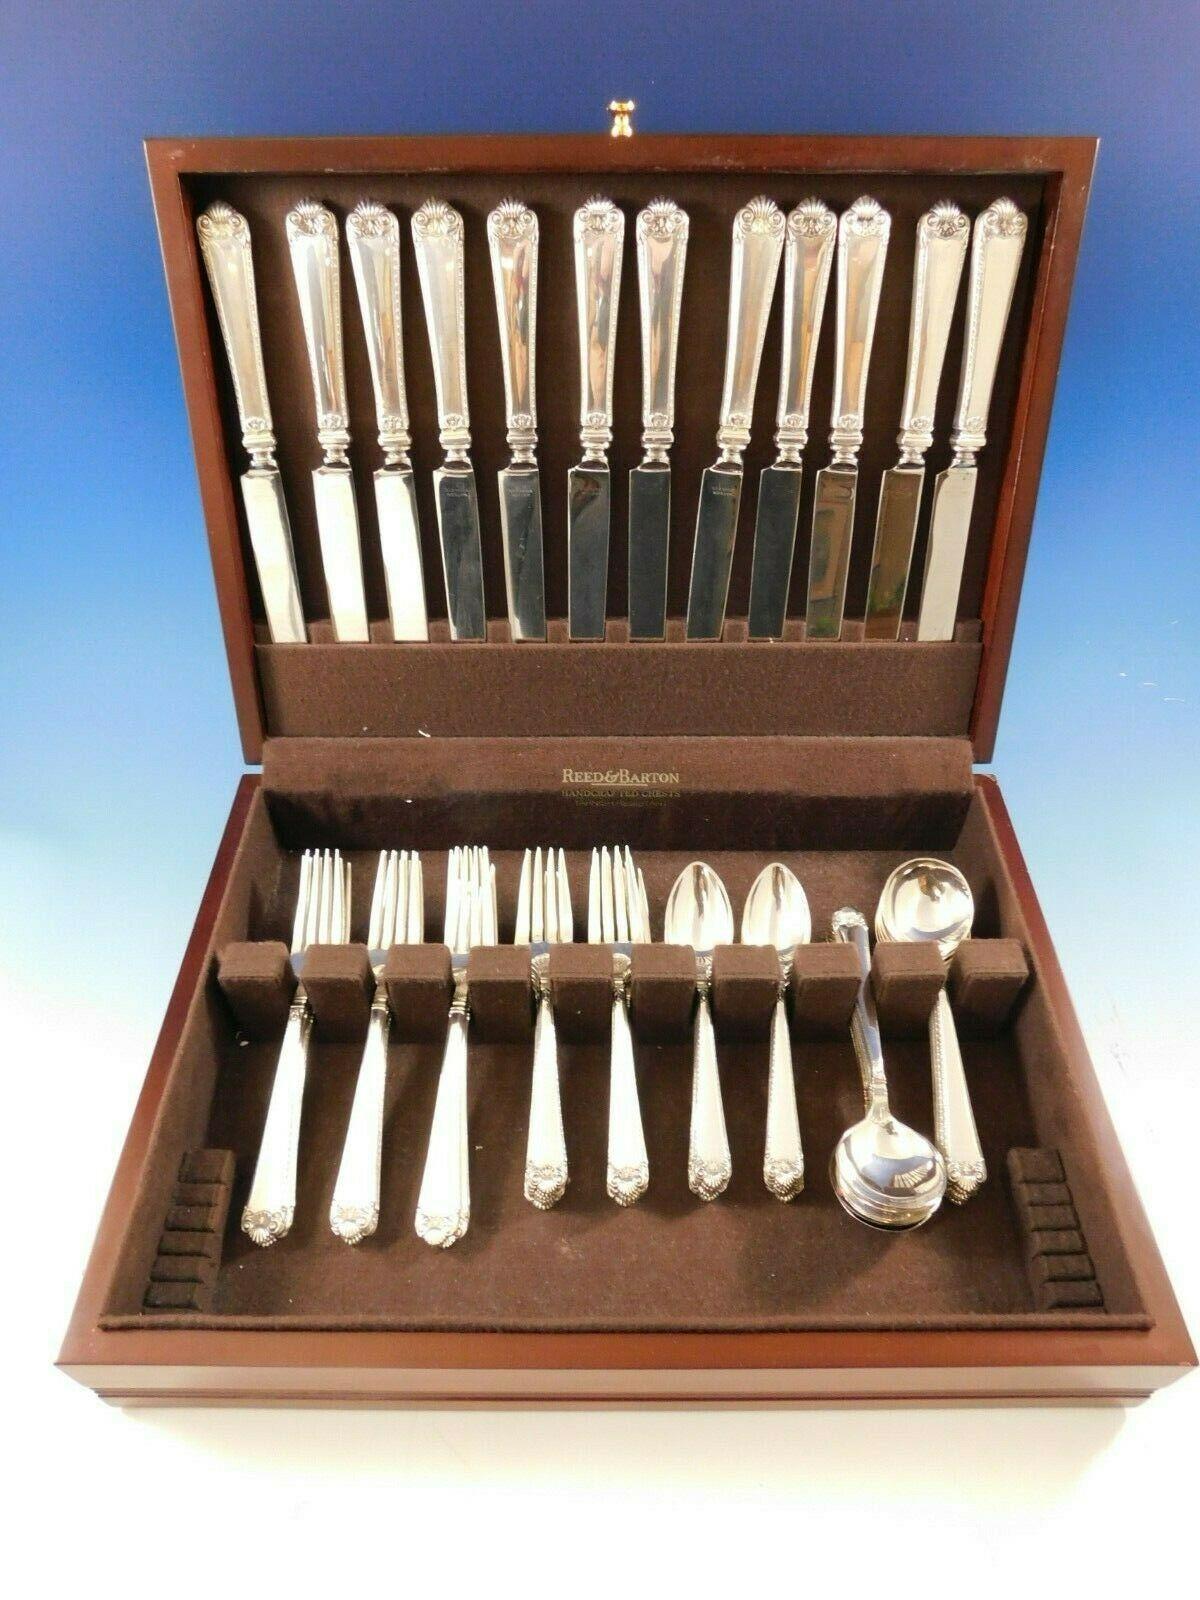 Fabulous George II Rex hand chased by Watson sterling silver dinner size flatware service, 60 pieces. This pattern is wonderfully heavy and especially scarce in the dinner size! This set includes:

12 dinner size knives, 10 1/4